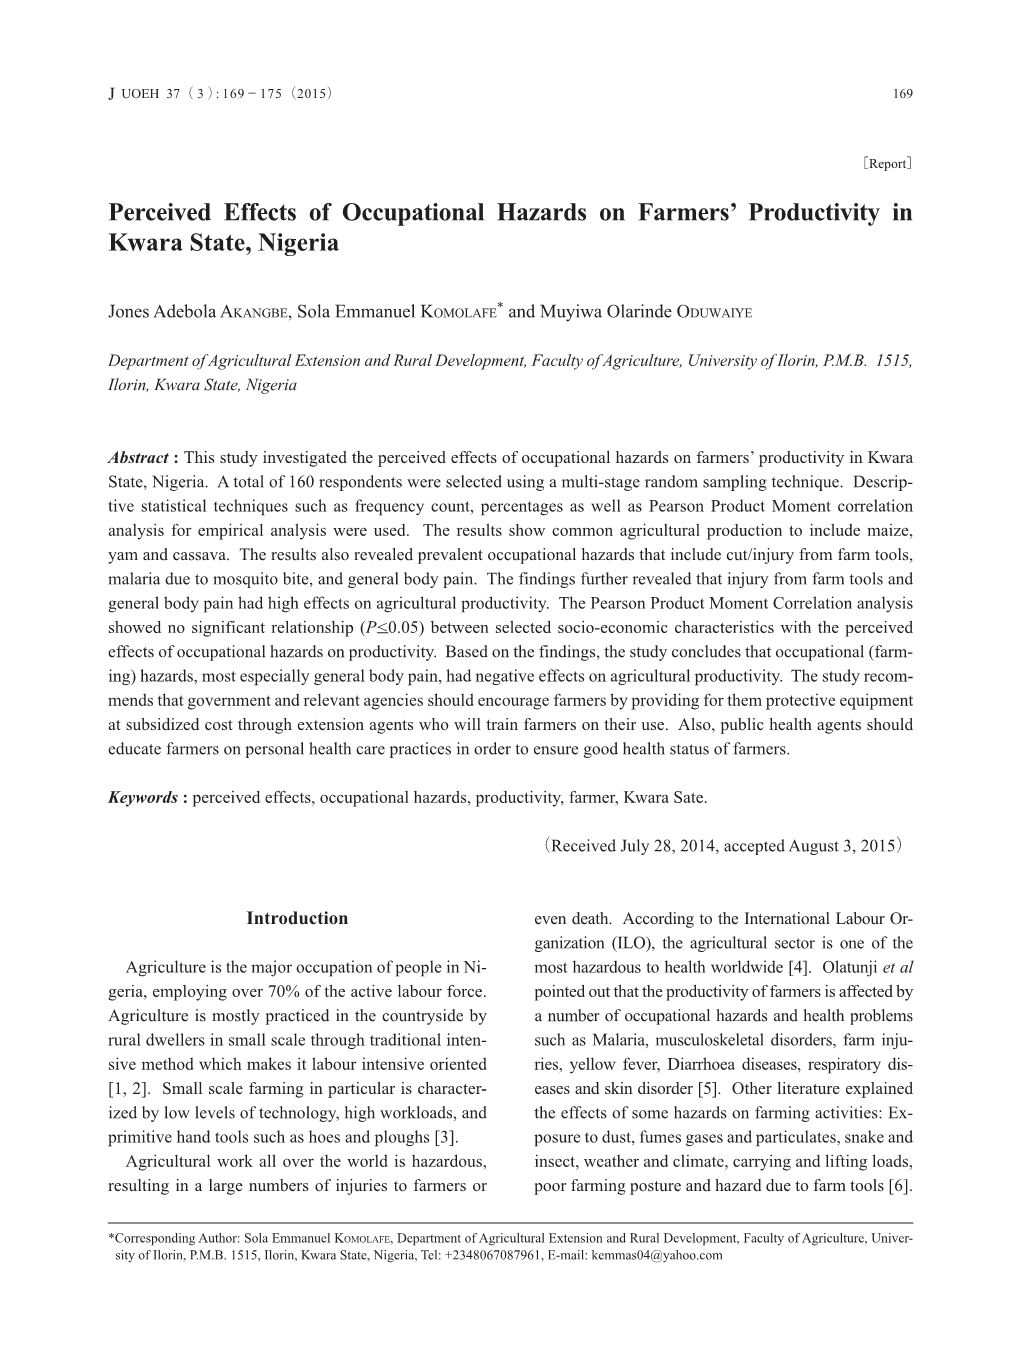 Perceived Effects of Occupational Hazards on Farmers' Productivity in Kwara State, Nigeria